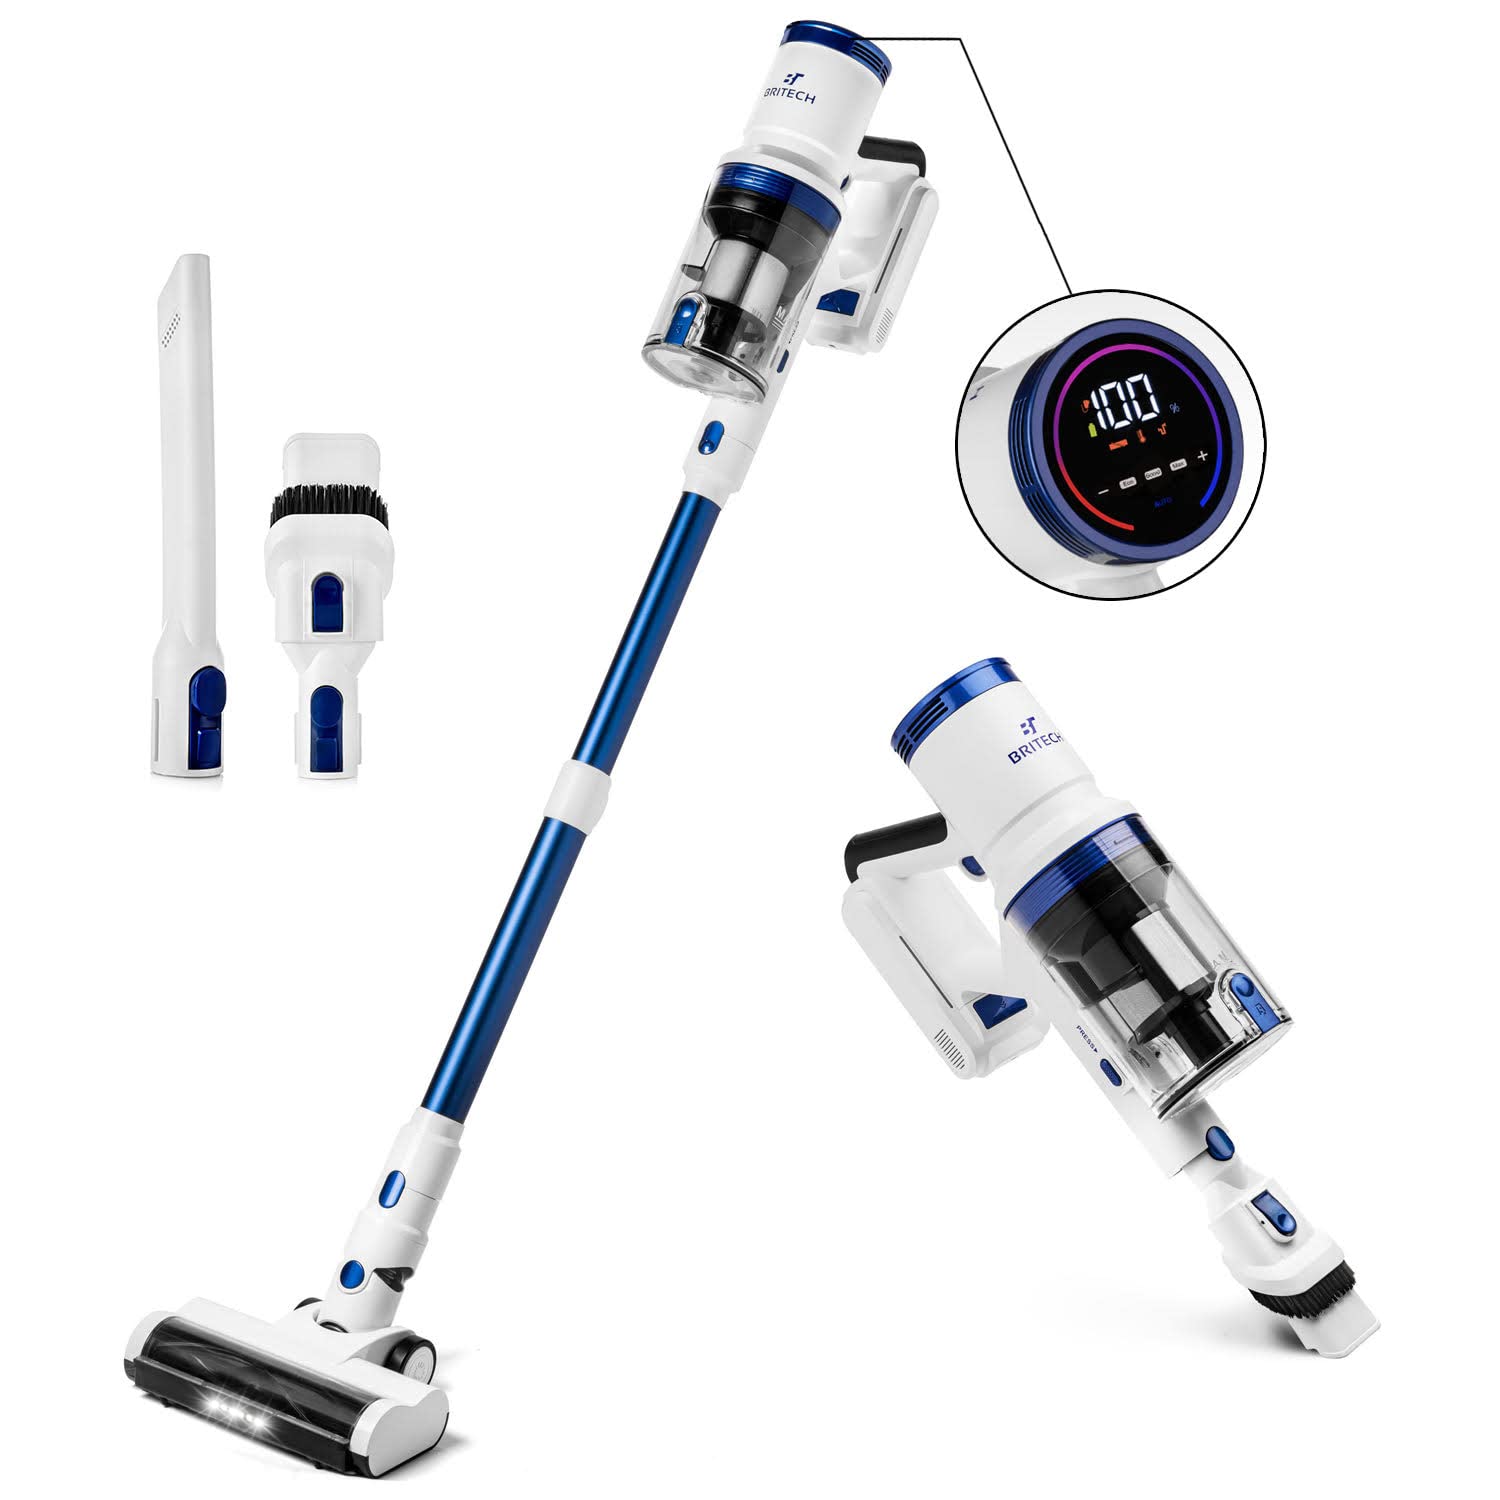 BRITECH Cordless Lightweight Stick Vacuum Cleaner, 300W Motor for Powerful Suction 40min Runtime, LED Display Screen & Headlights, Great for Carpet Cleaner, Hardwood Floor & Pet Hair (Blue)  - Acceptable